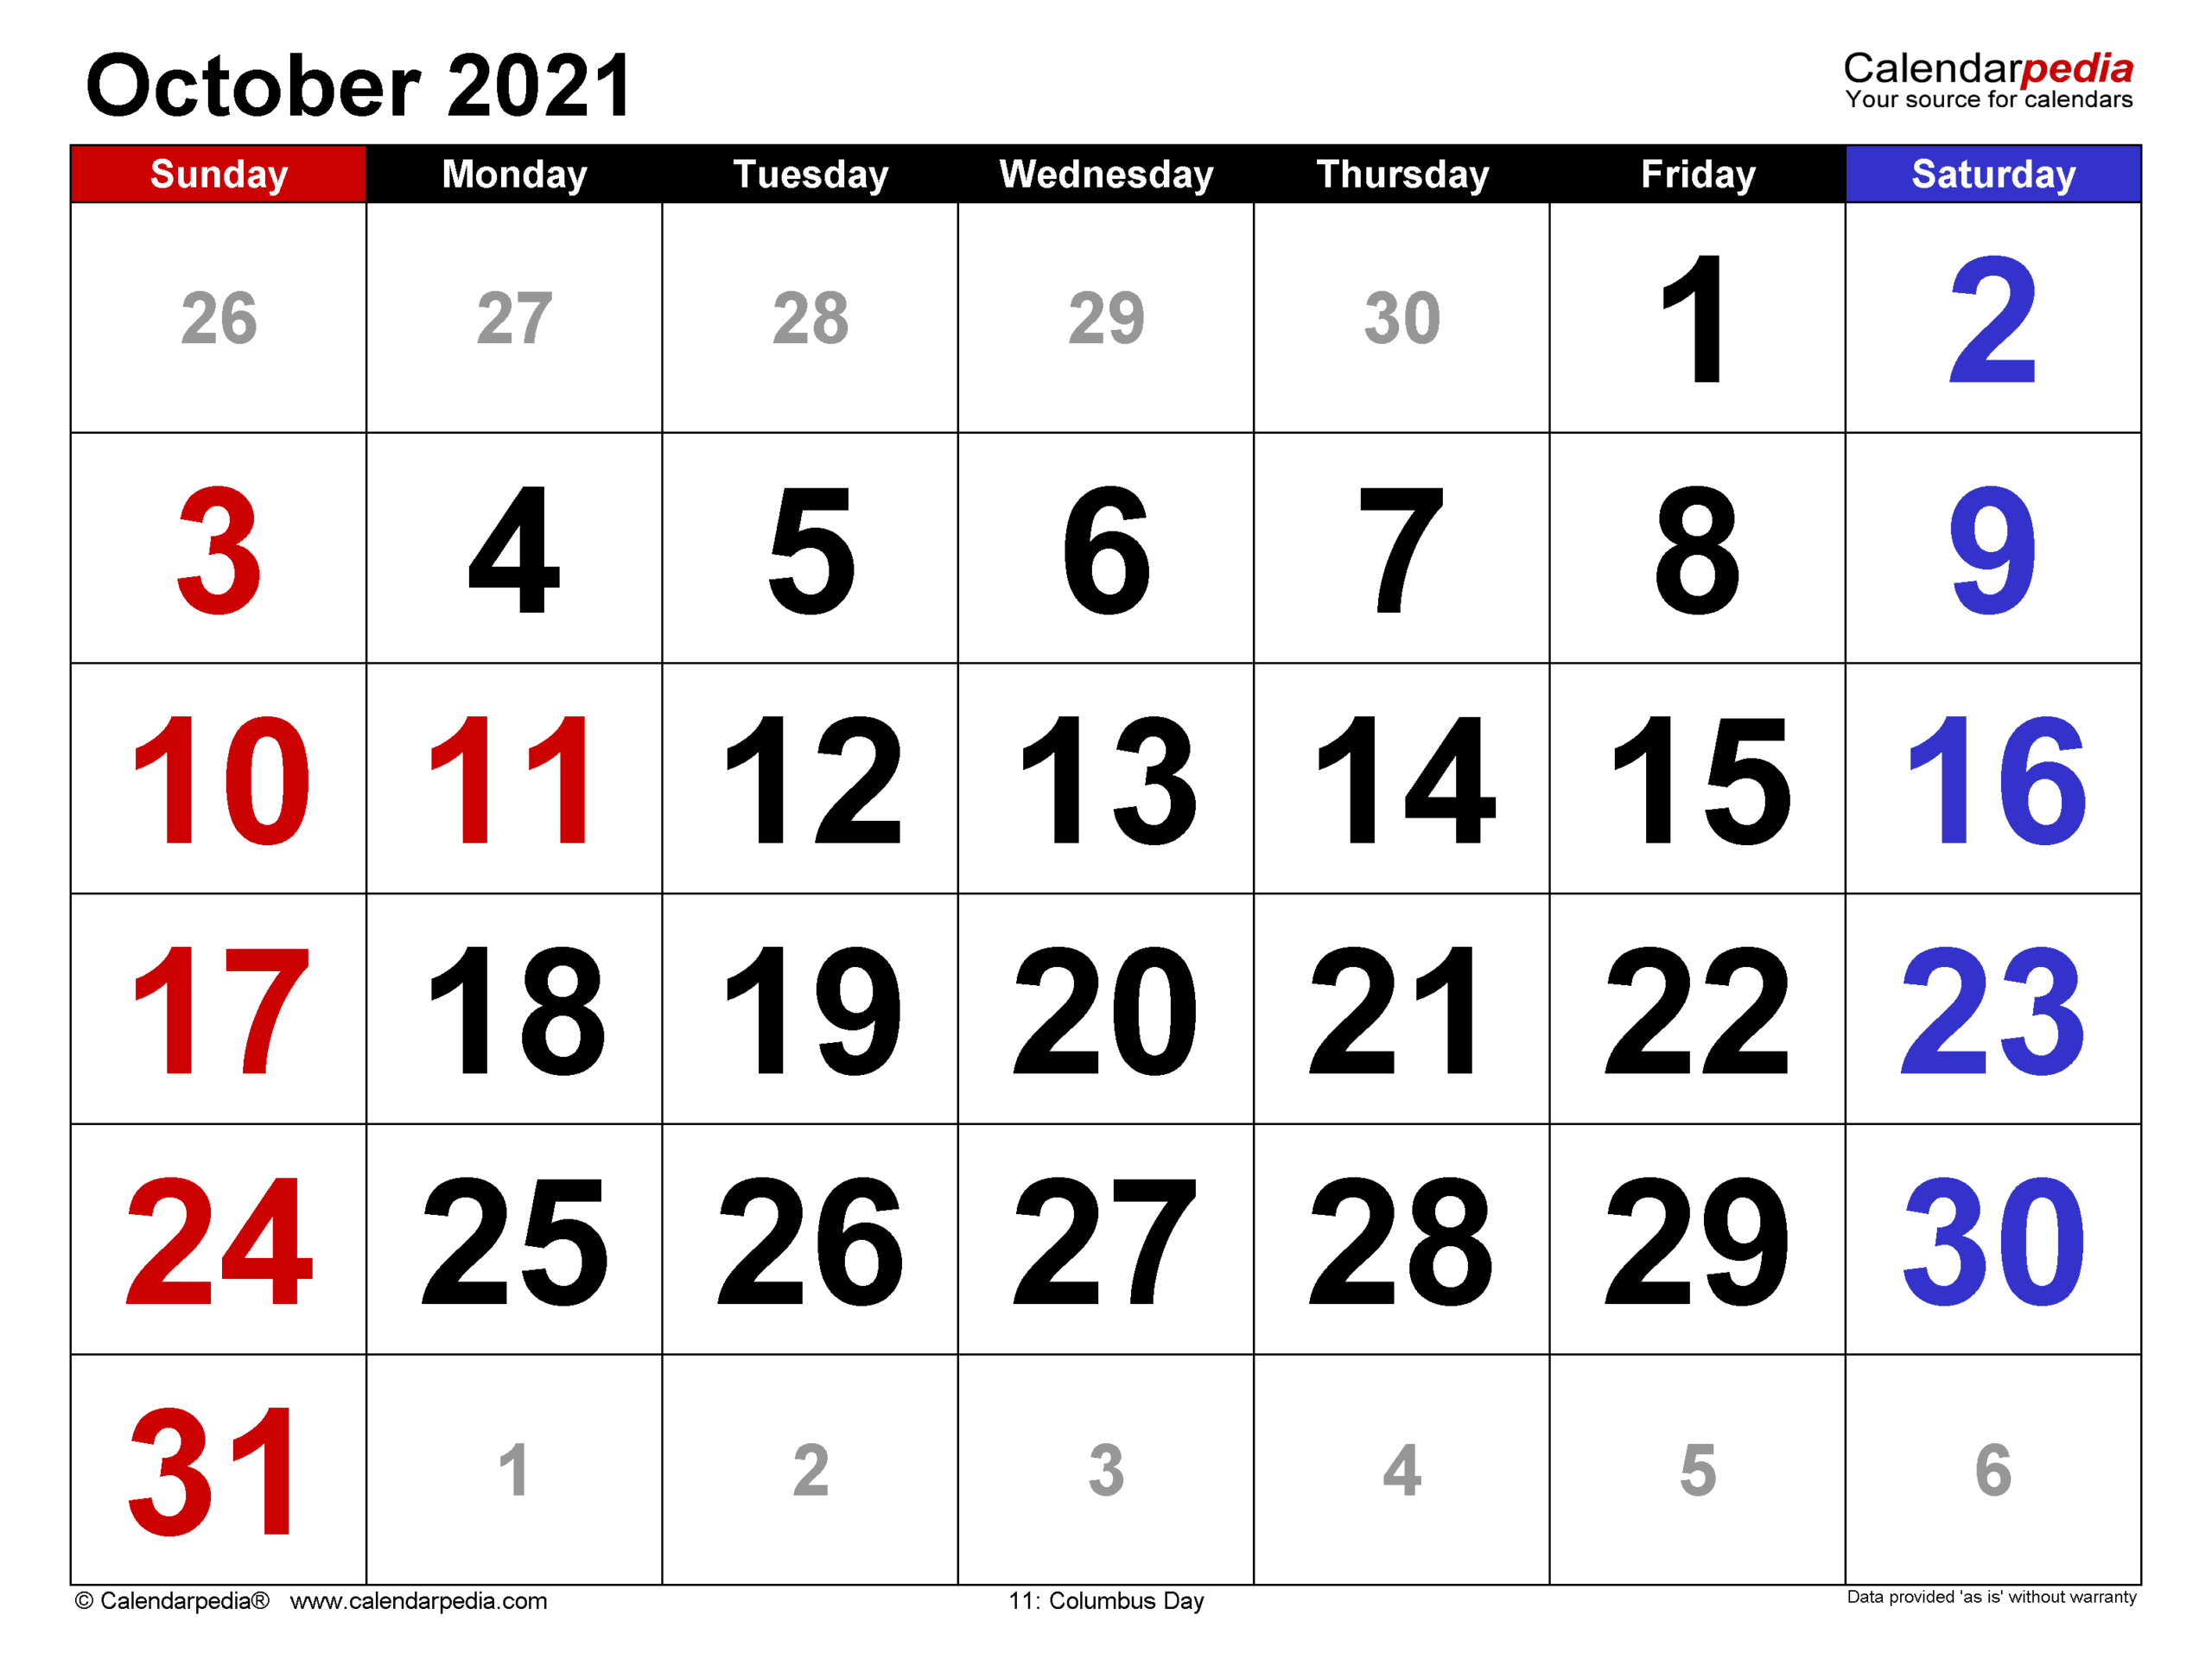 October 2021 Calendar | Templates For Word, Excel And Pdf